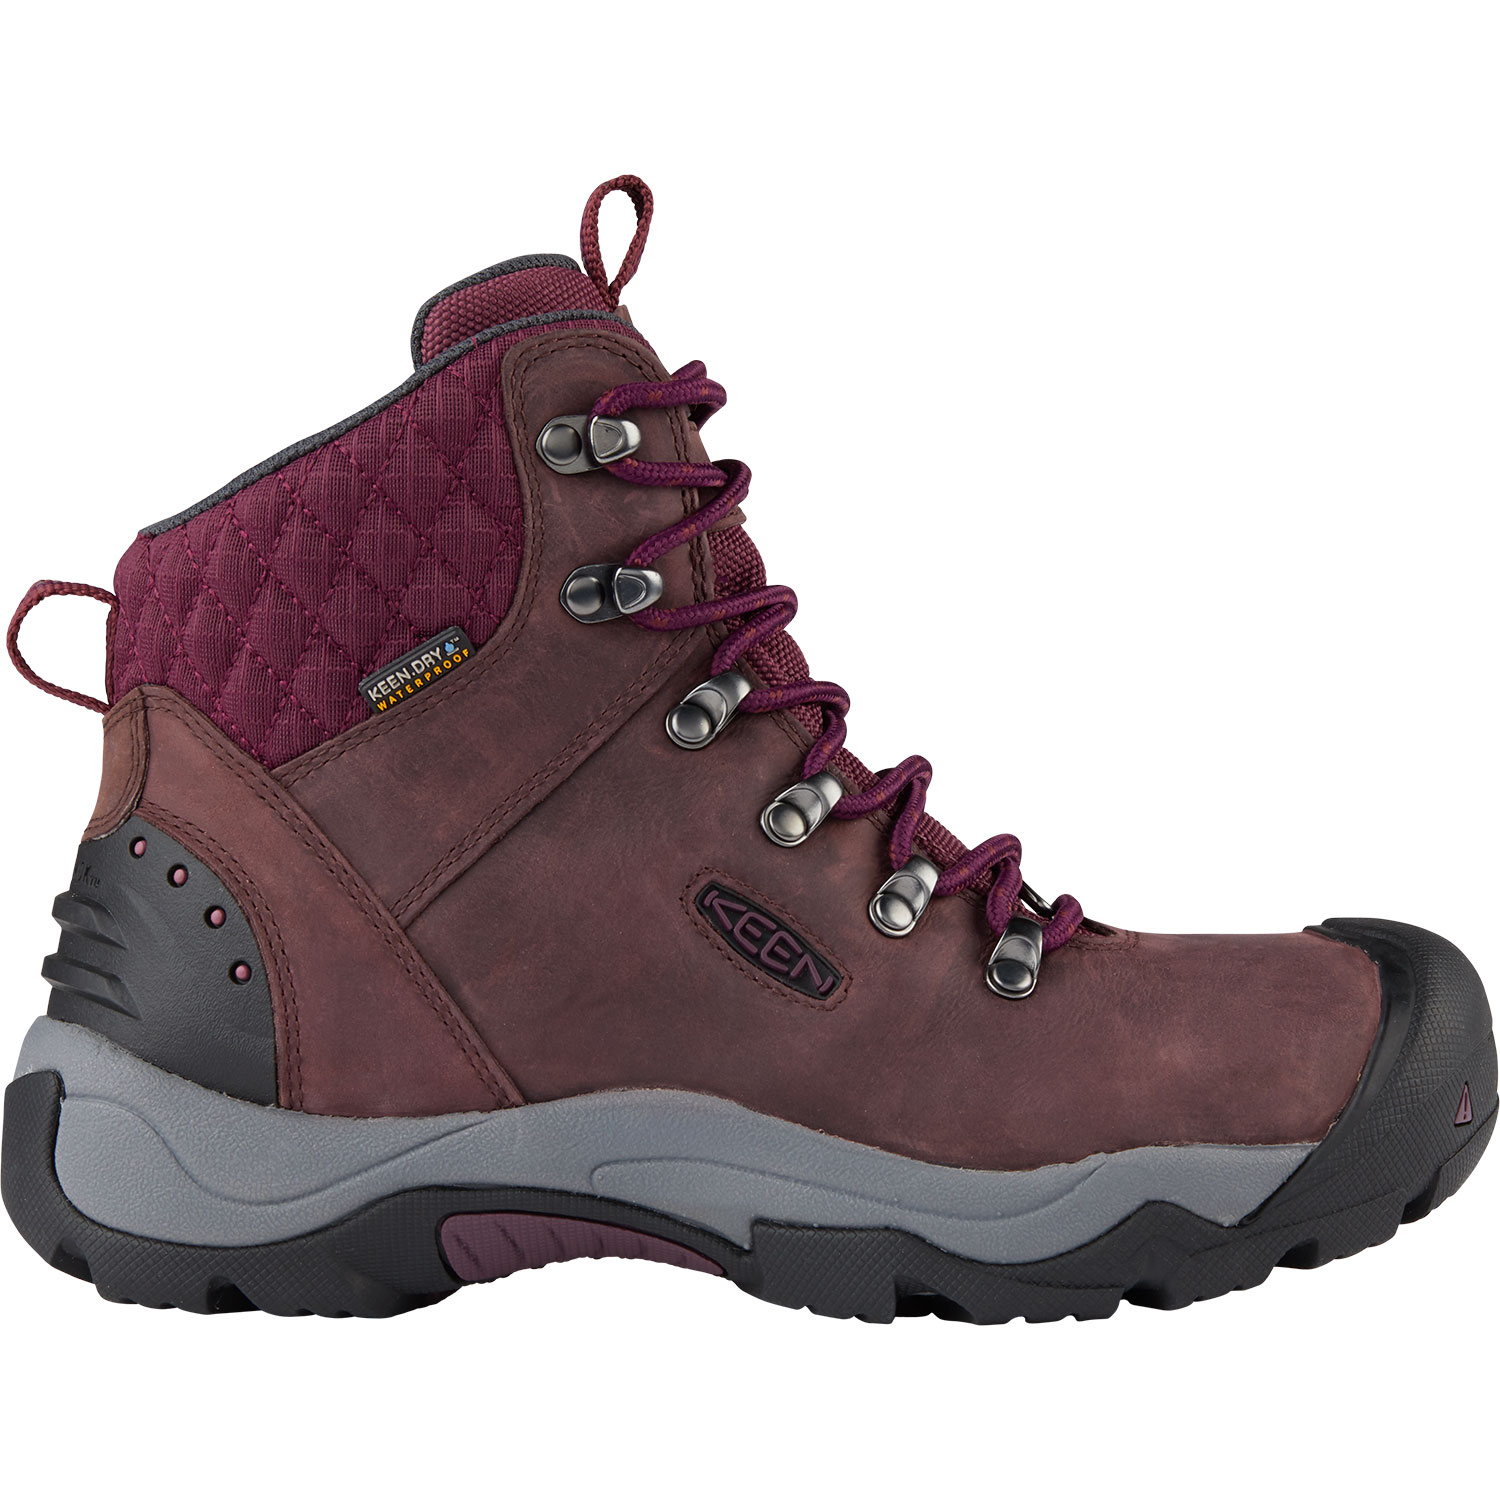 Womens Keen Revel Iii Boots Duluth Trading Company 